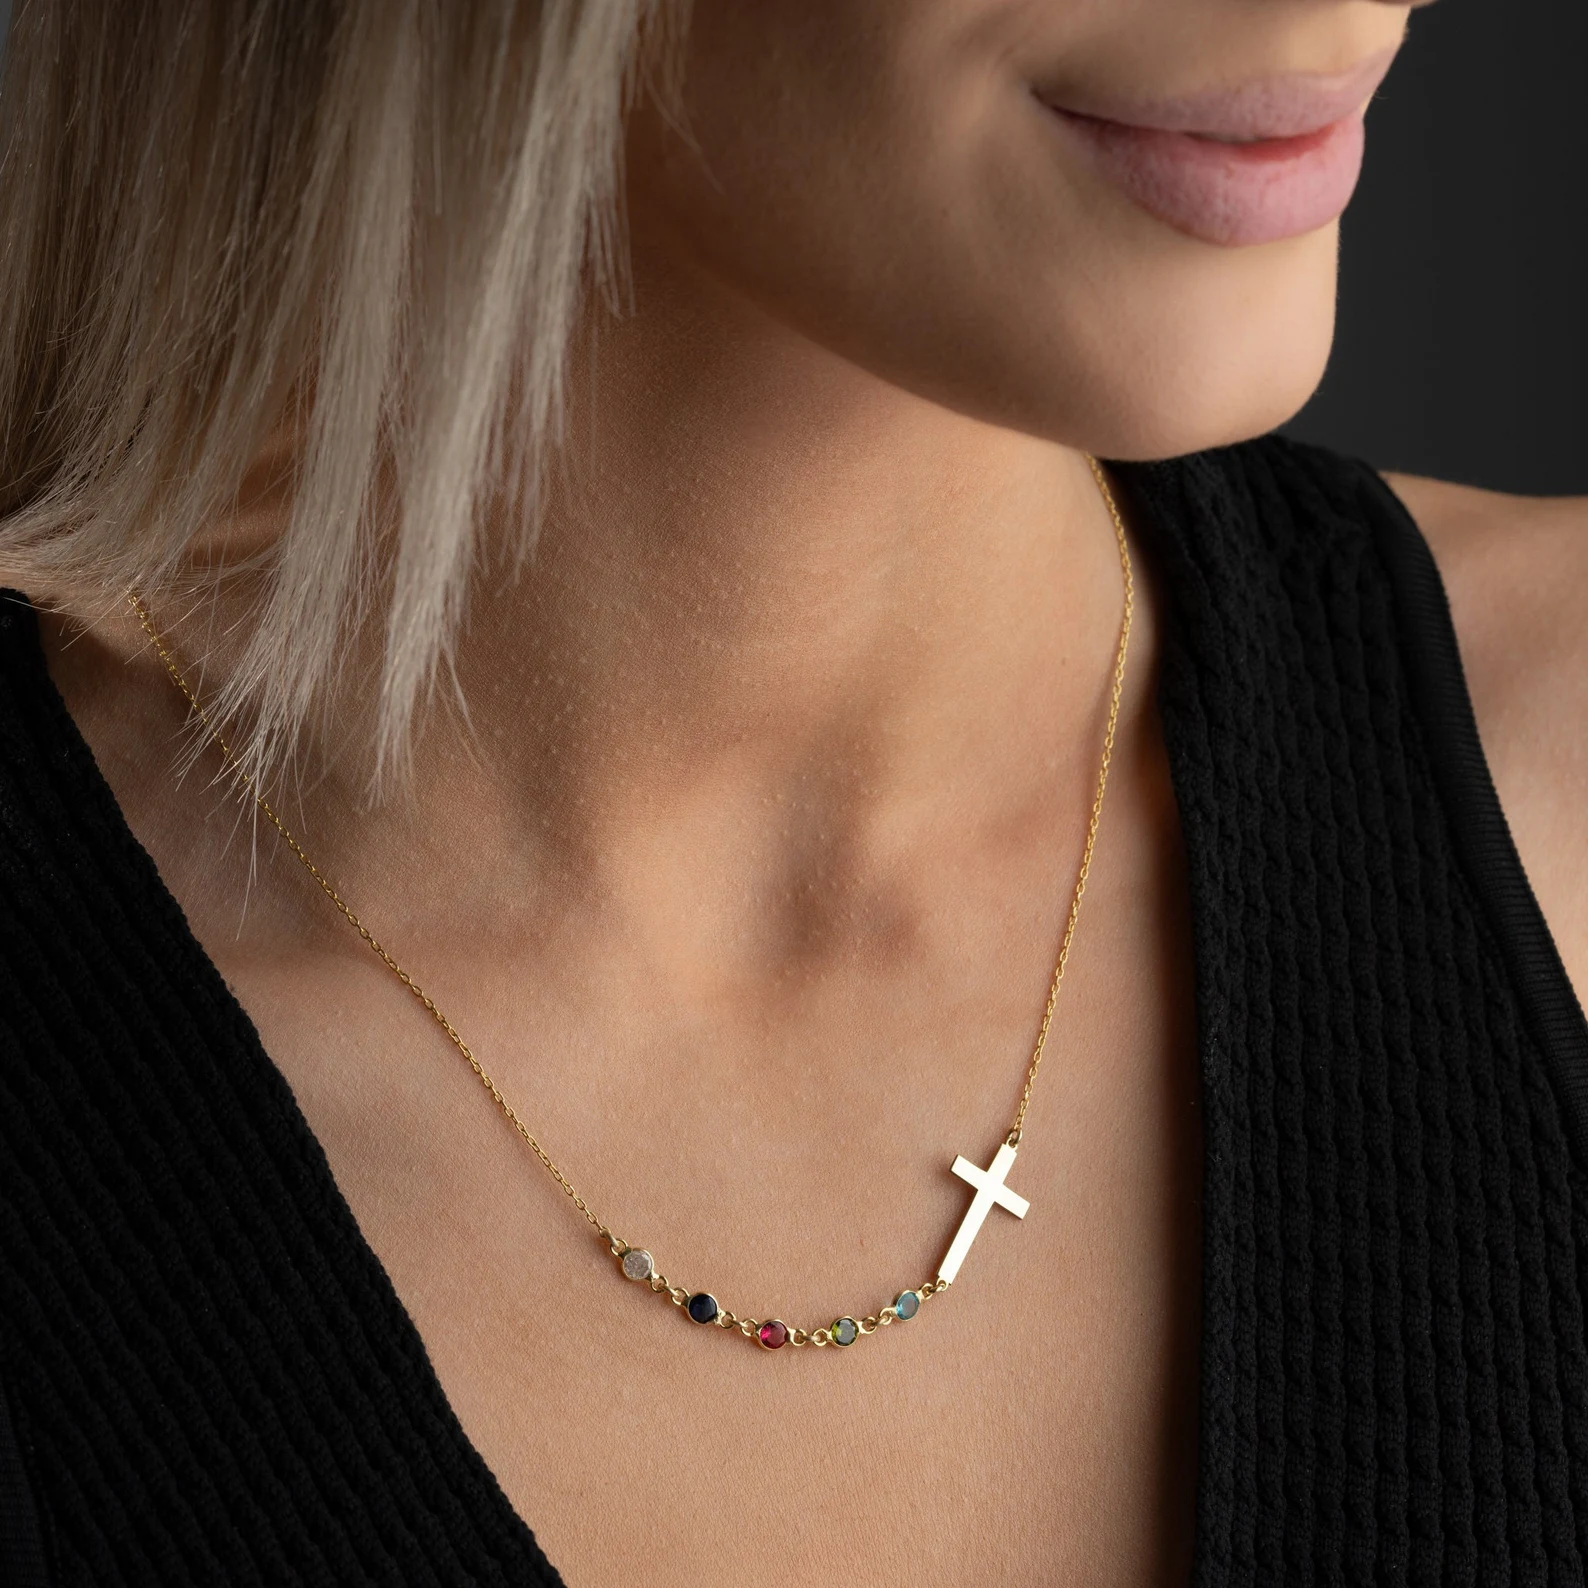 Personalized Birthstone Silver Cross Necklace, Cross Family Birthstone Necklace